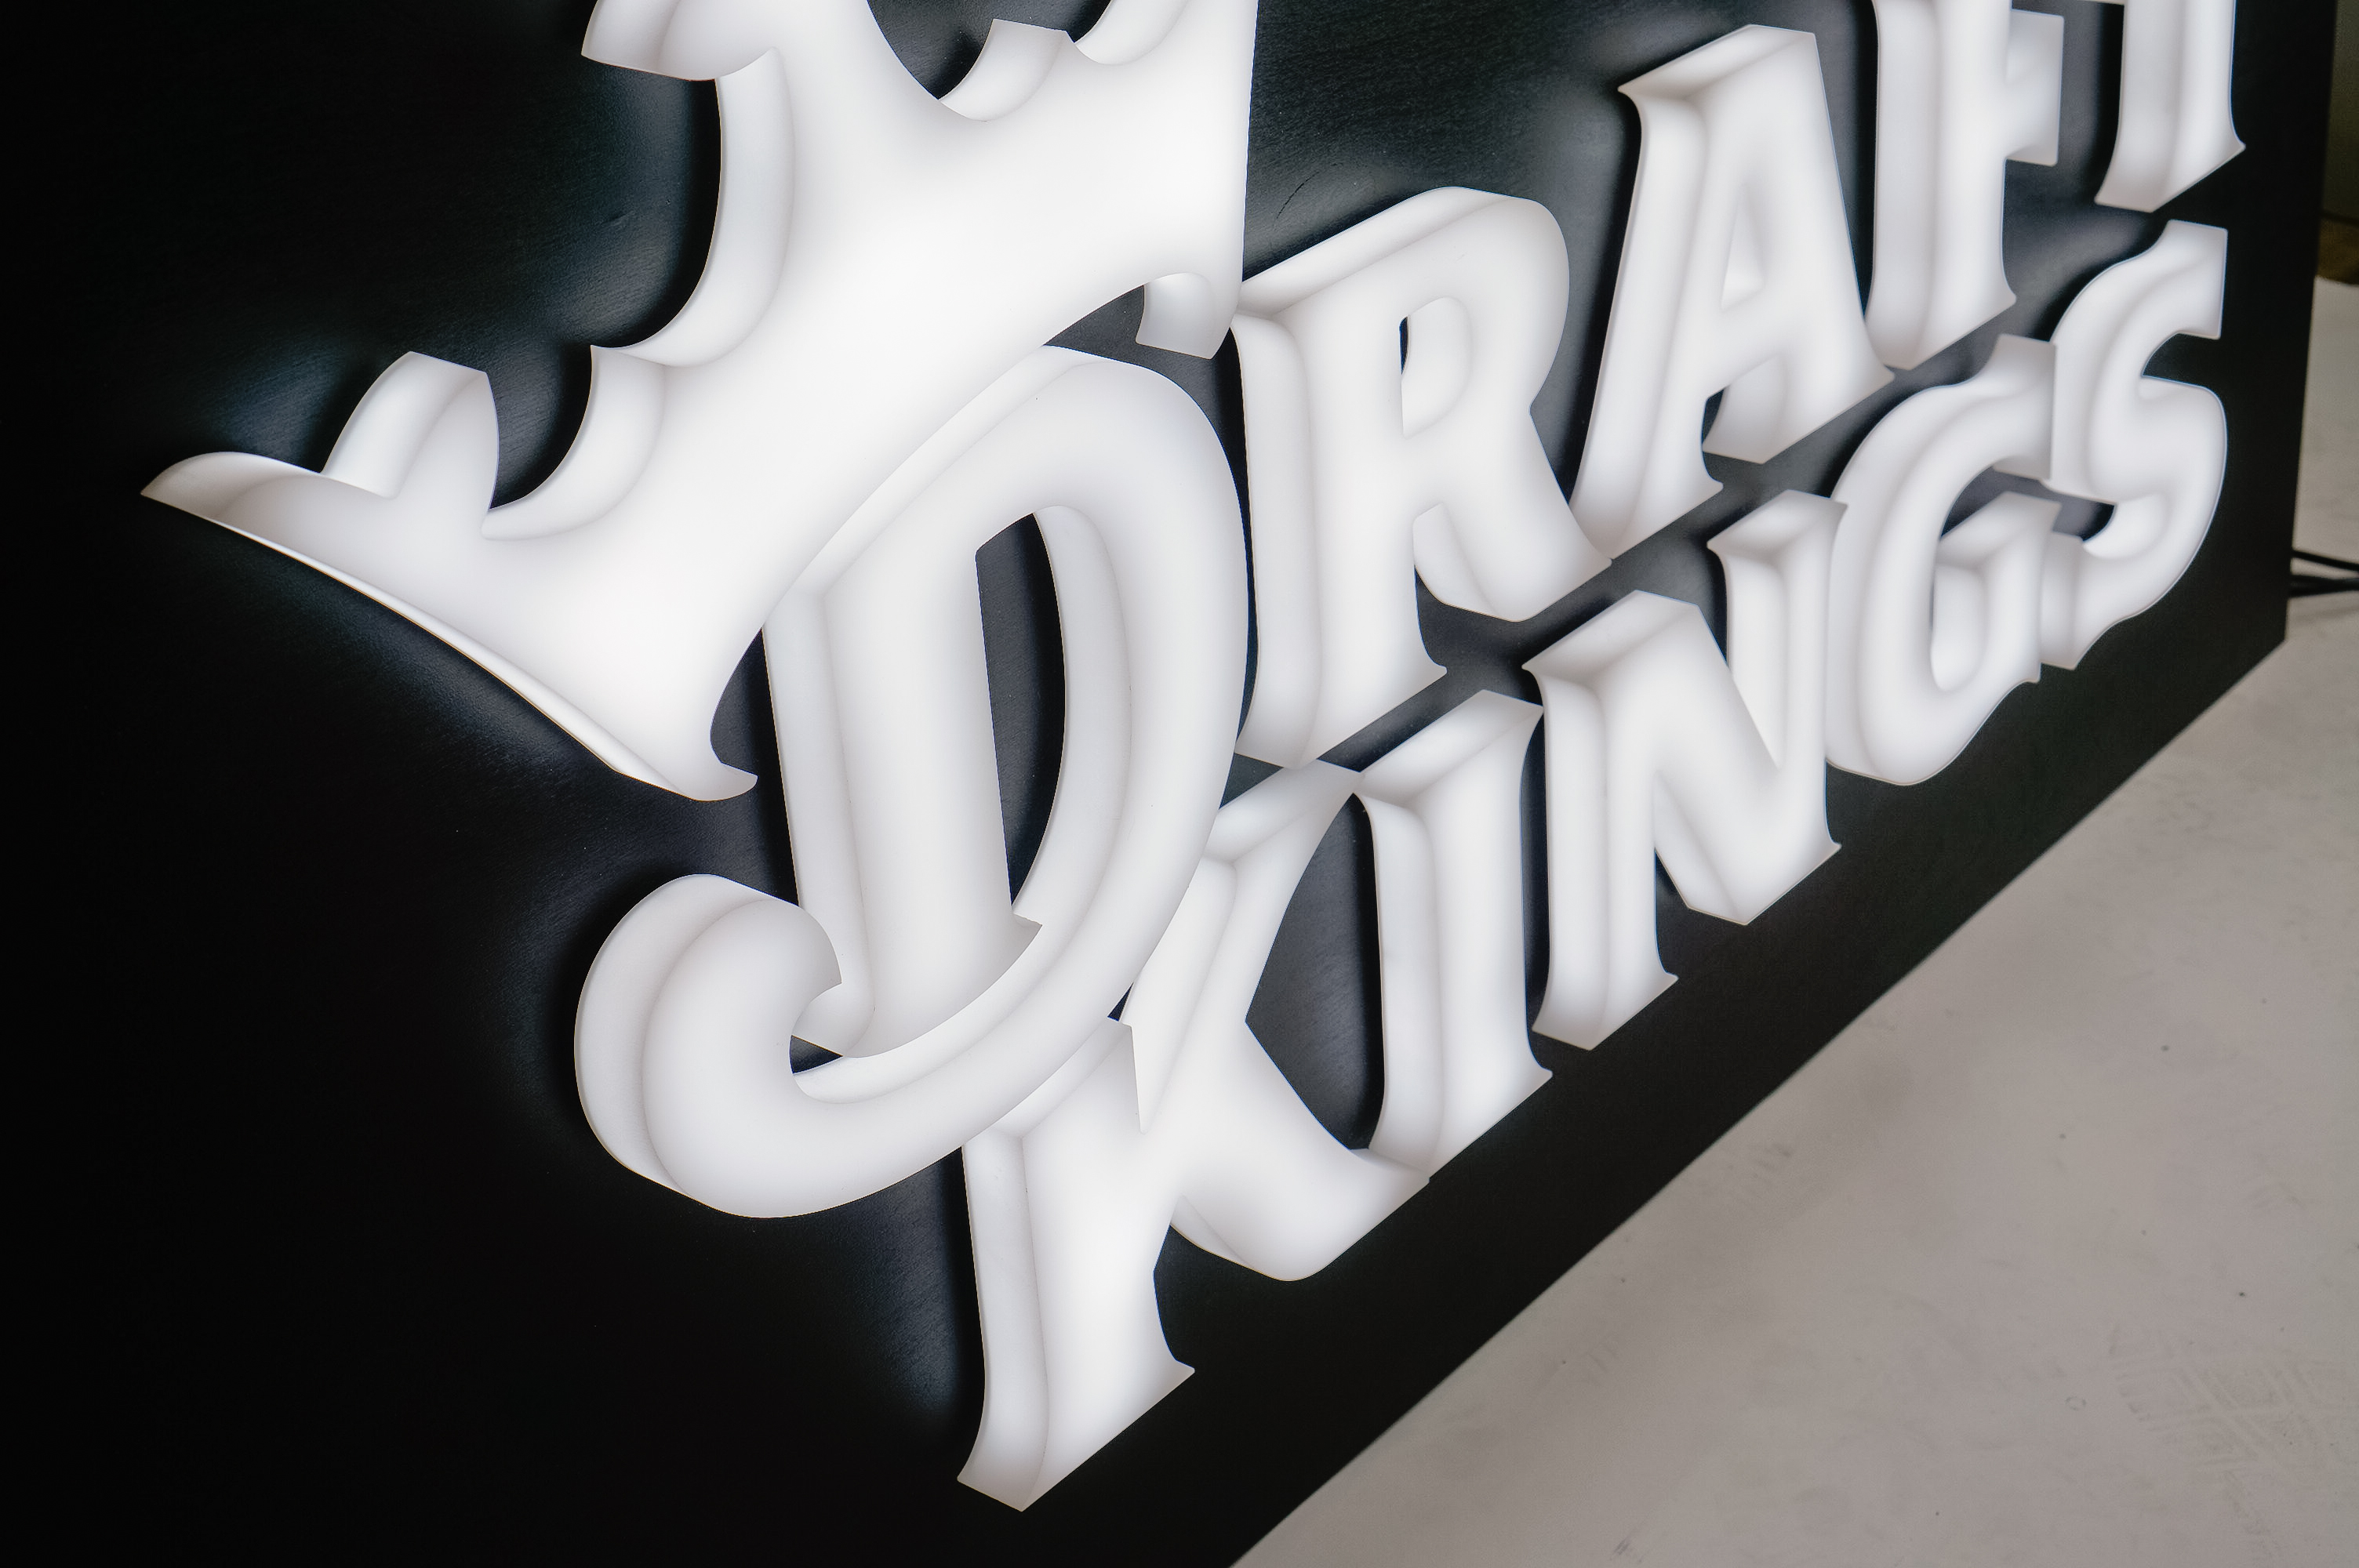 Illuminated, face-lit white logo on a black painted backer/wall for the San Francisco office of Draft Kings, an American daily fantasy sports contest and sports betting provider.